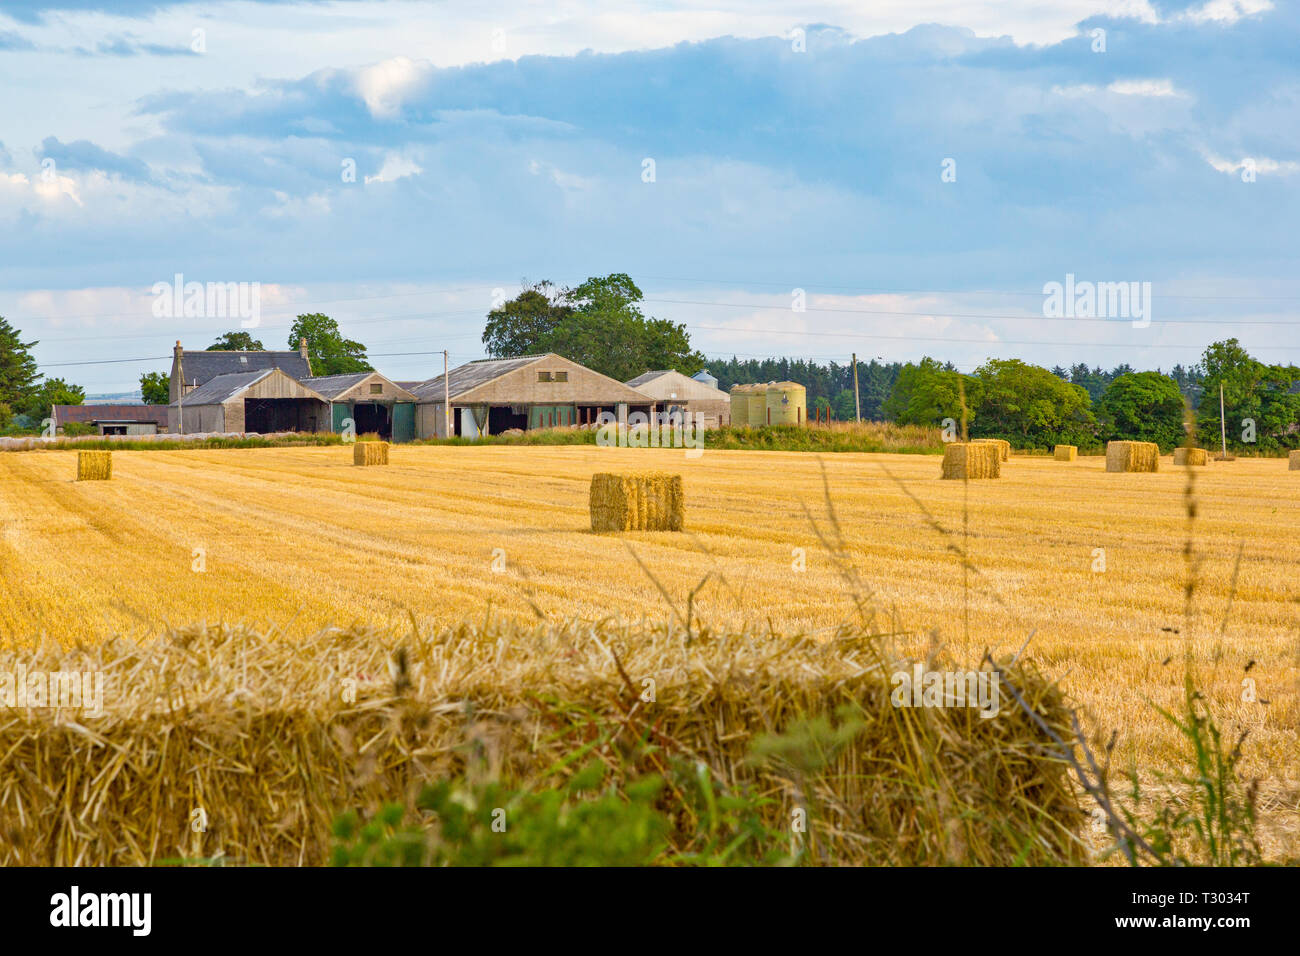 View of Farm Buildings among a field of Barley near Portsoy in Aberdeenshire Scotland Stock Photo